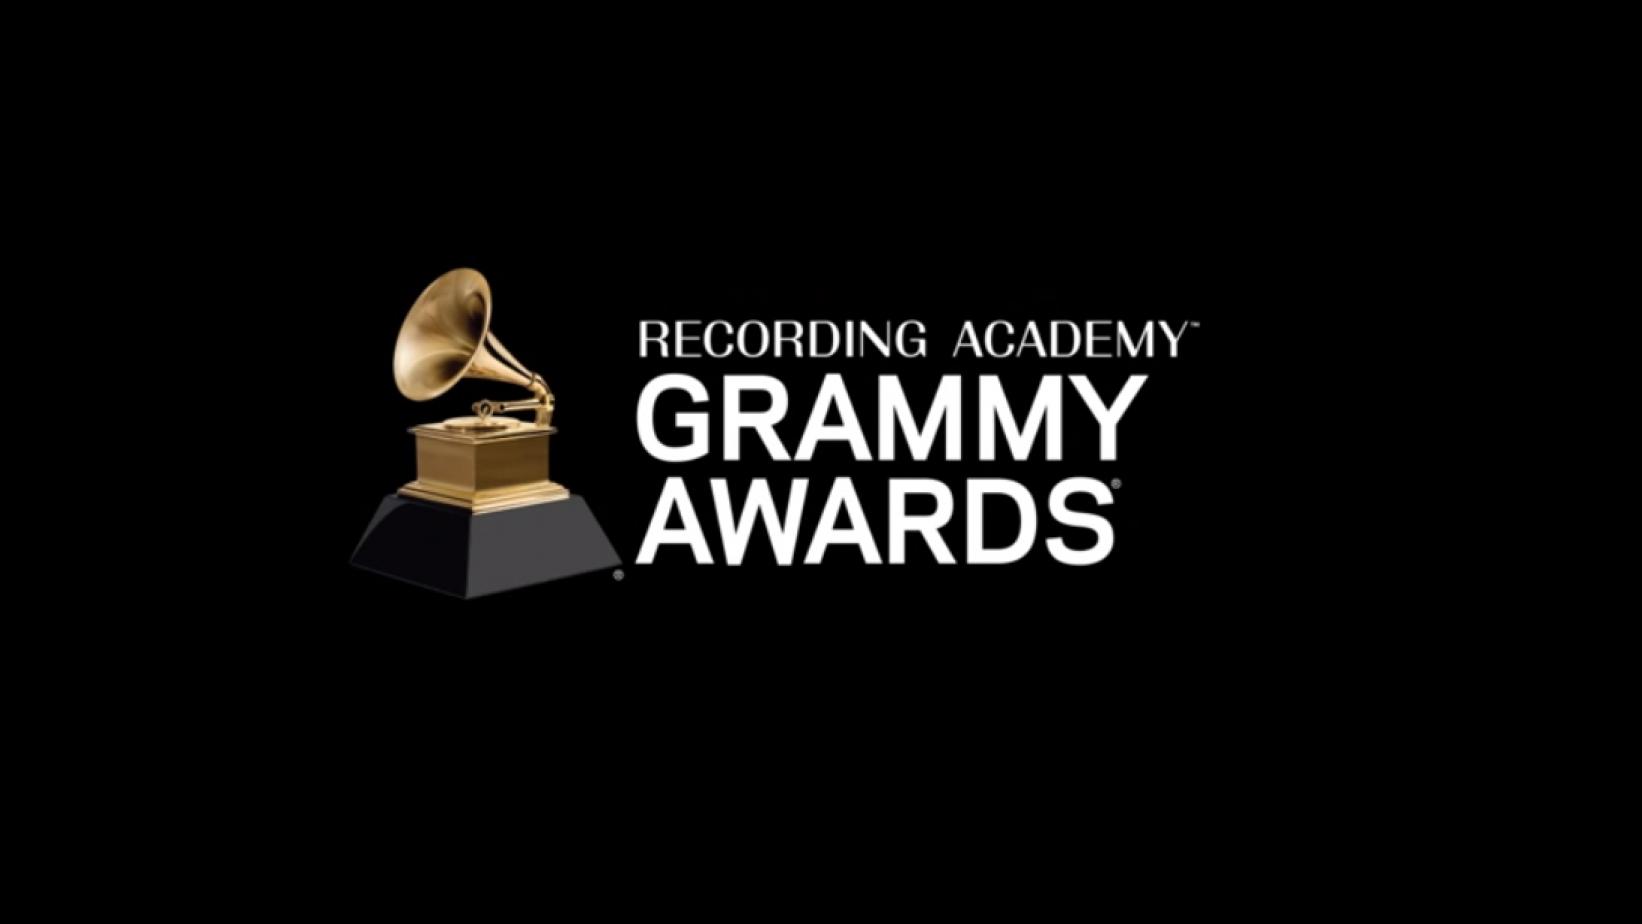 Grammy Awards reportedly postponed due to COVID-19